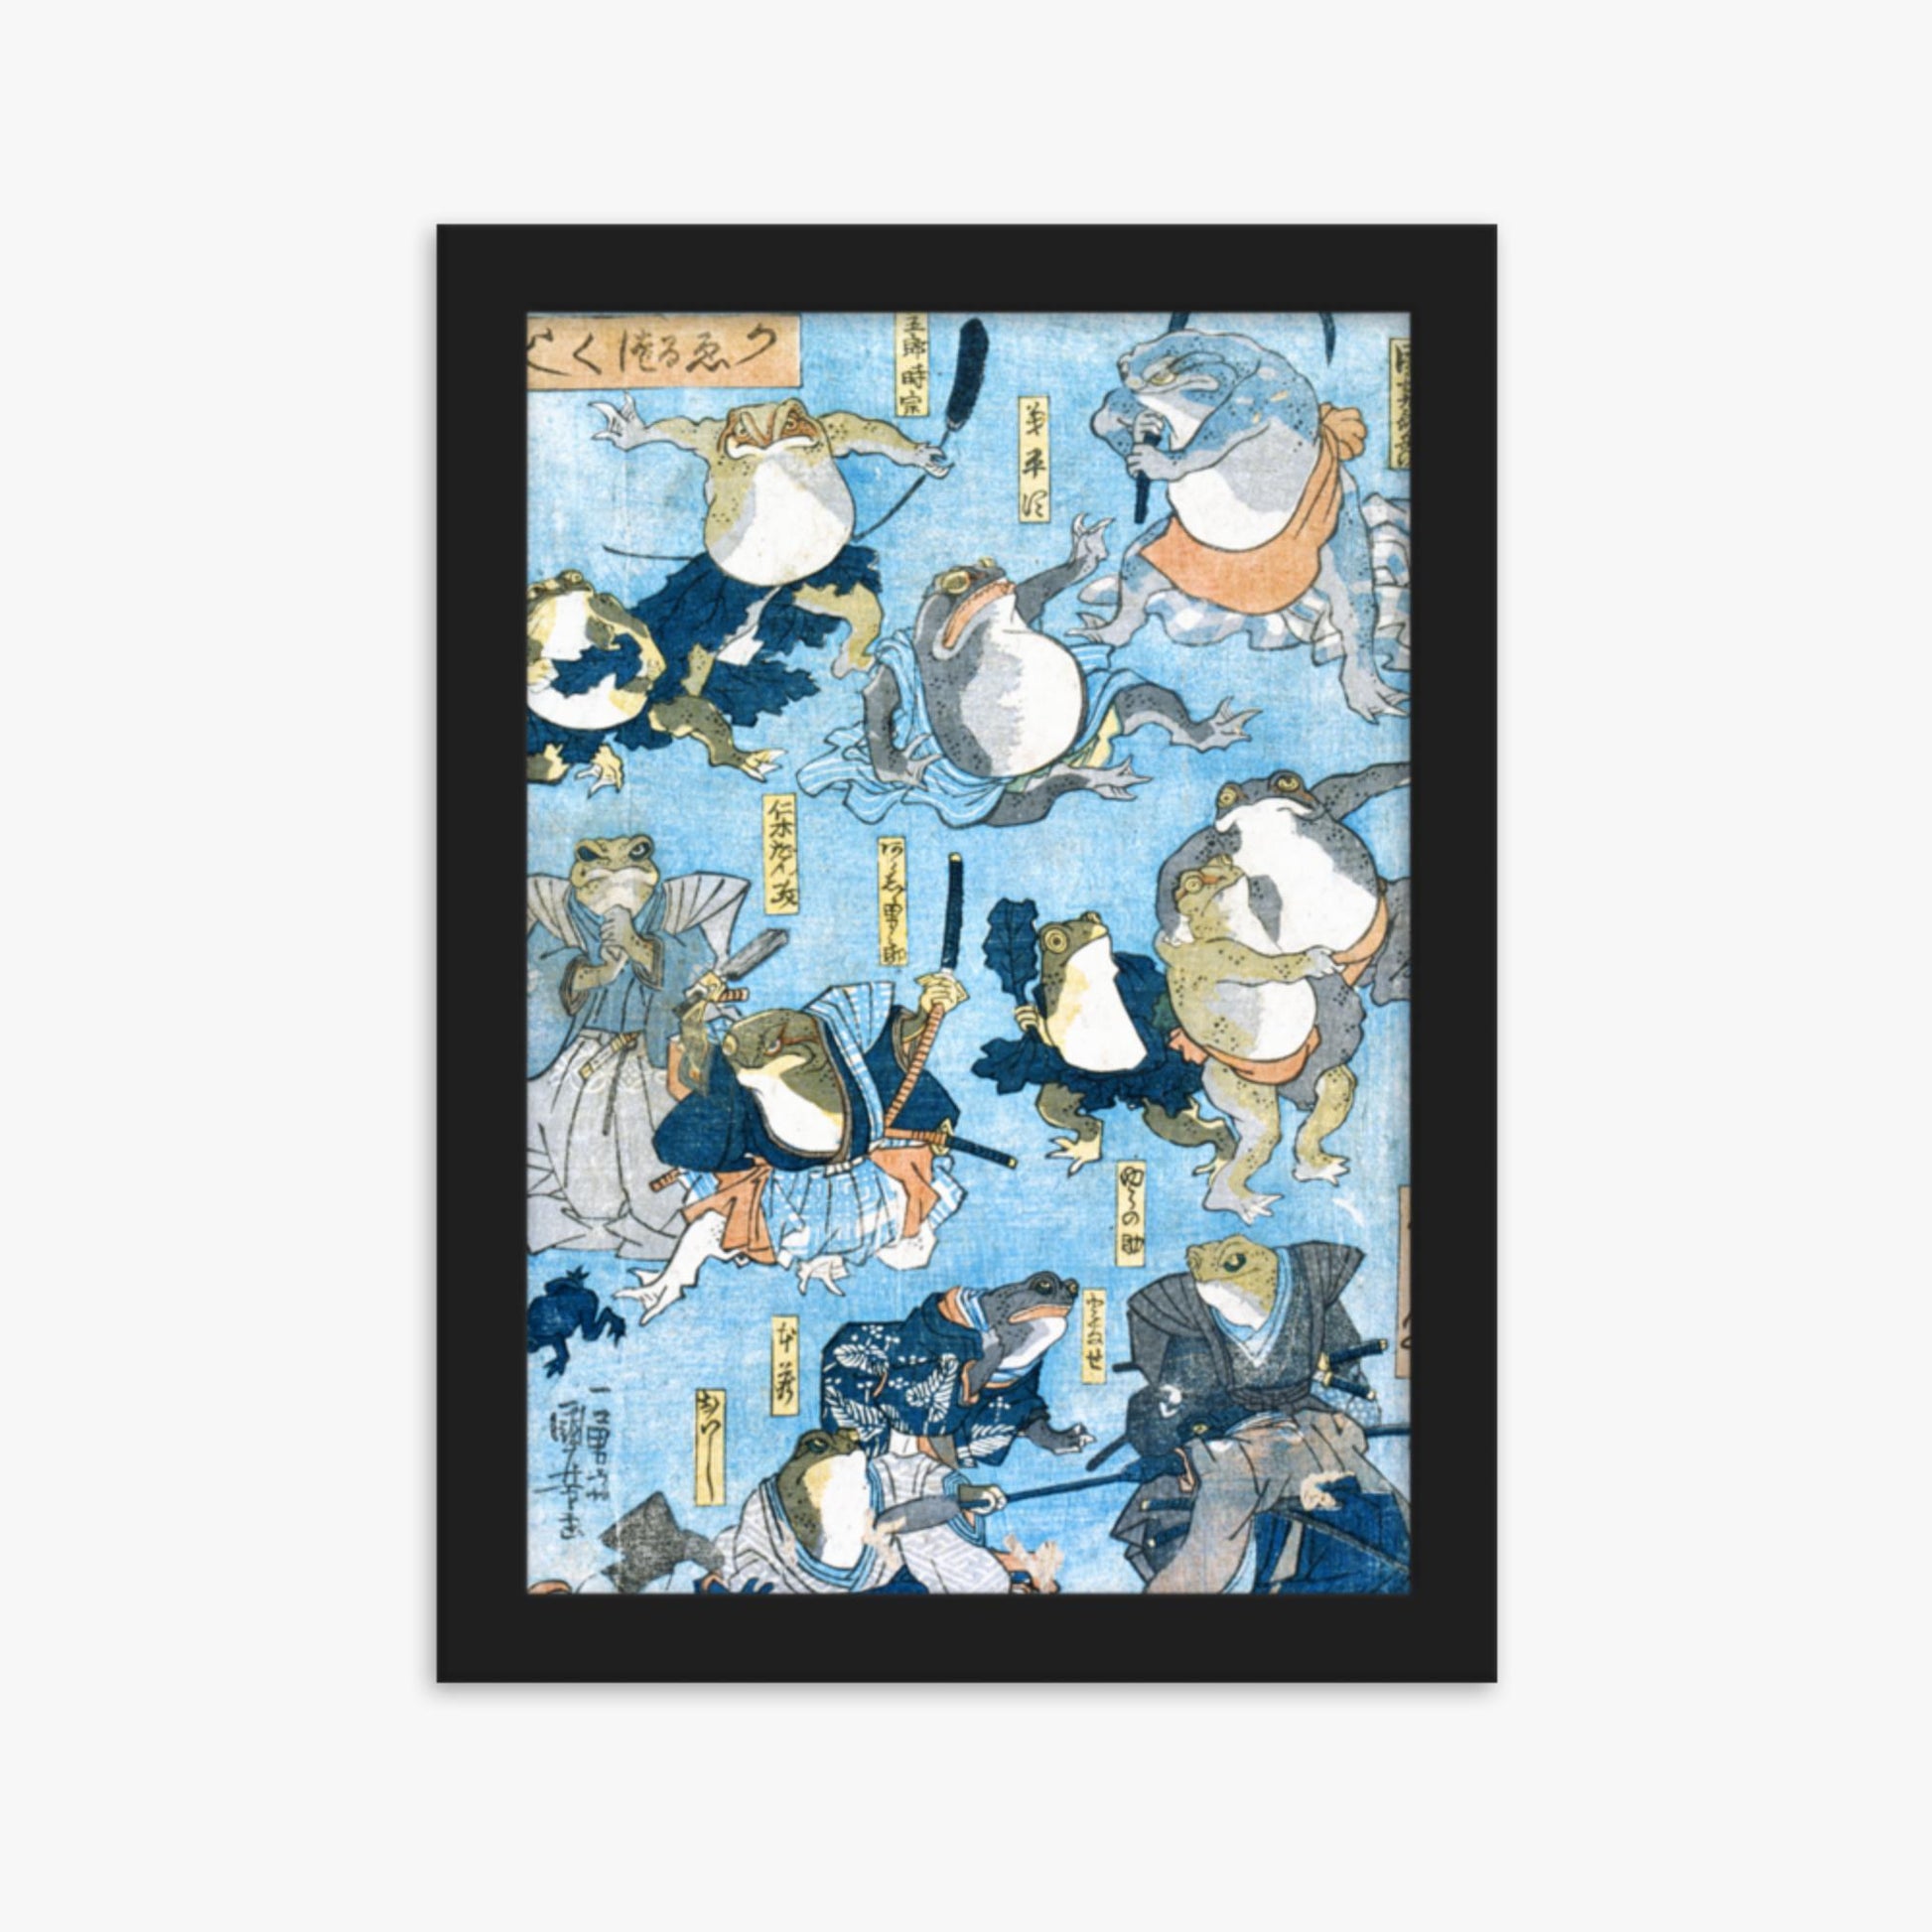 Utagawa Kuniyoshi - Famous Heroes of the Kabuki Stage Played by Frogs  21x30 cm Poster With Black Frame